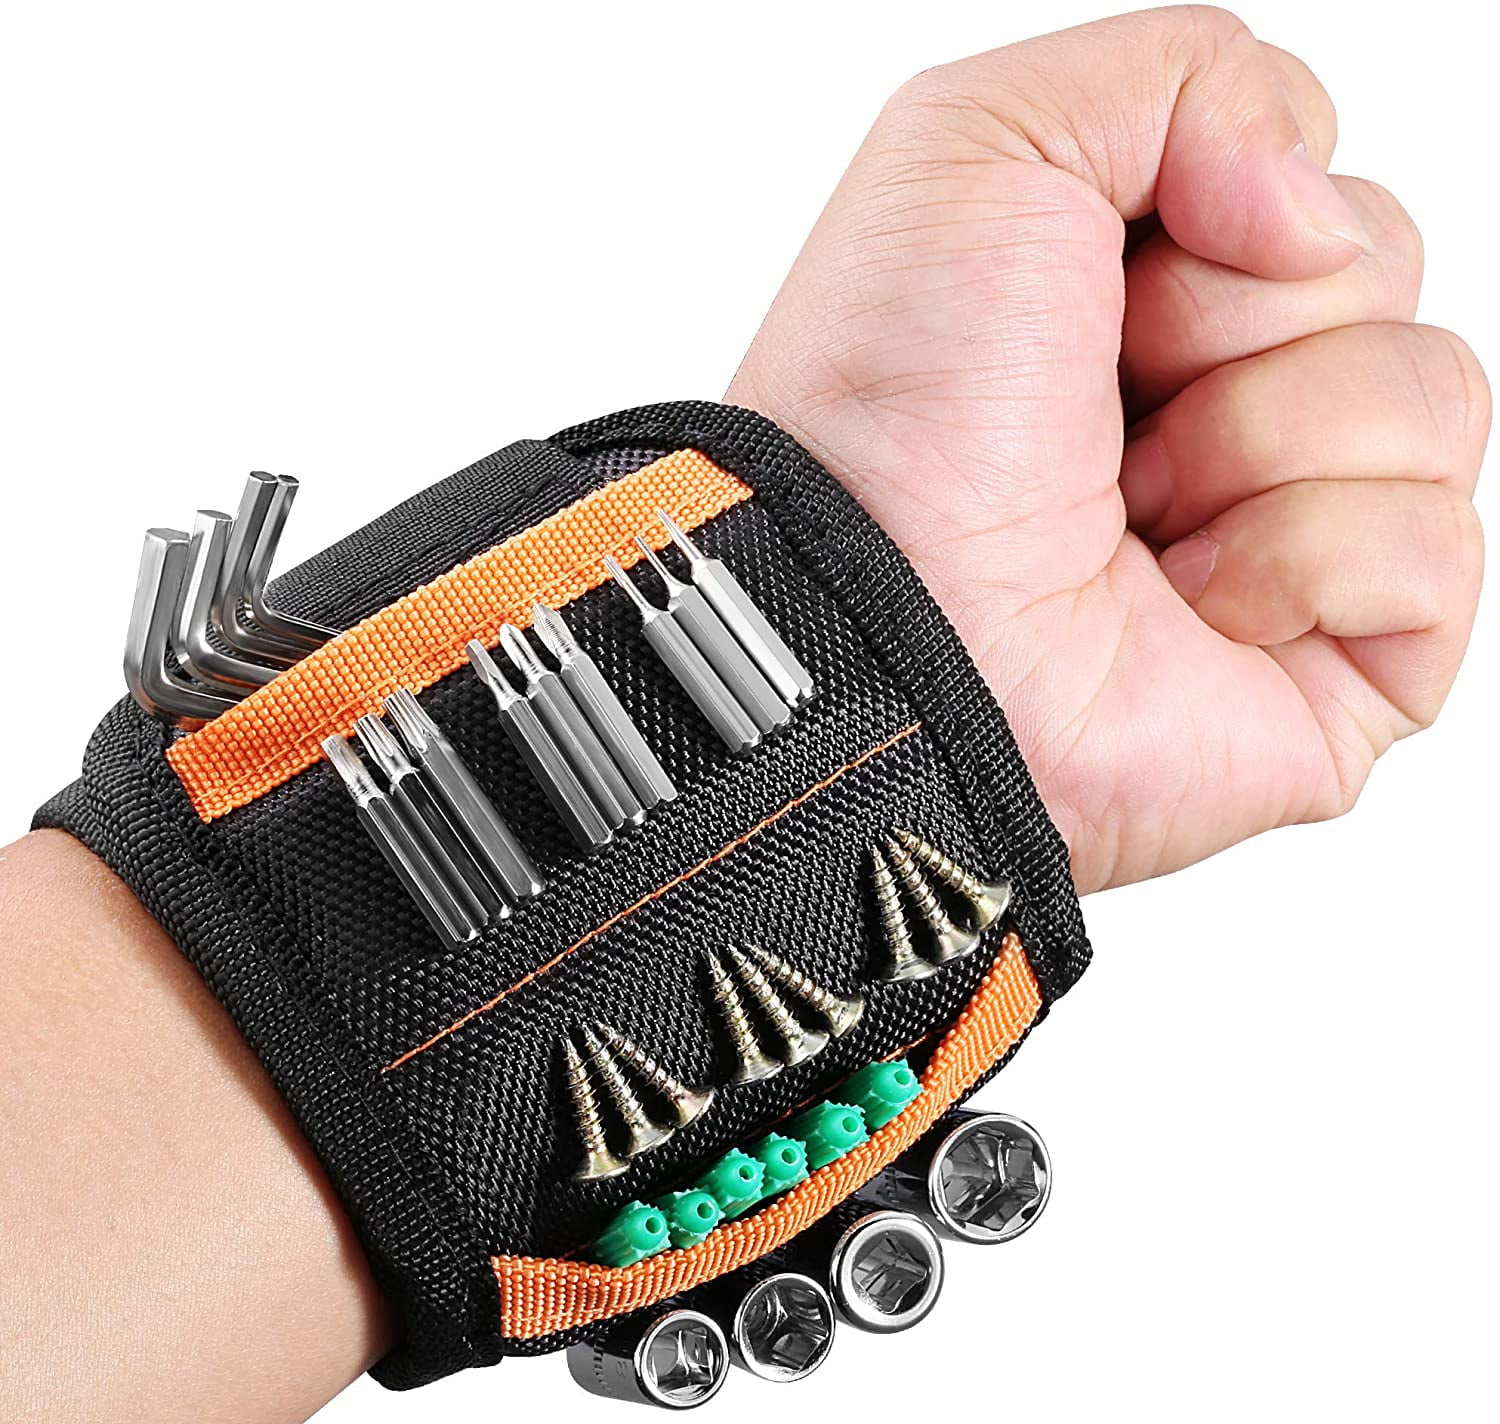 Magnetic Tool Wristband Powerful Adjustable Magnets for Holding Screws Bolts UK 